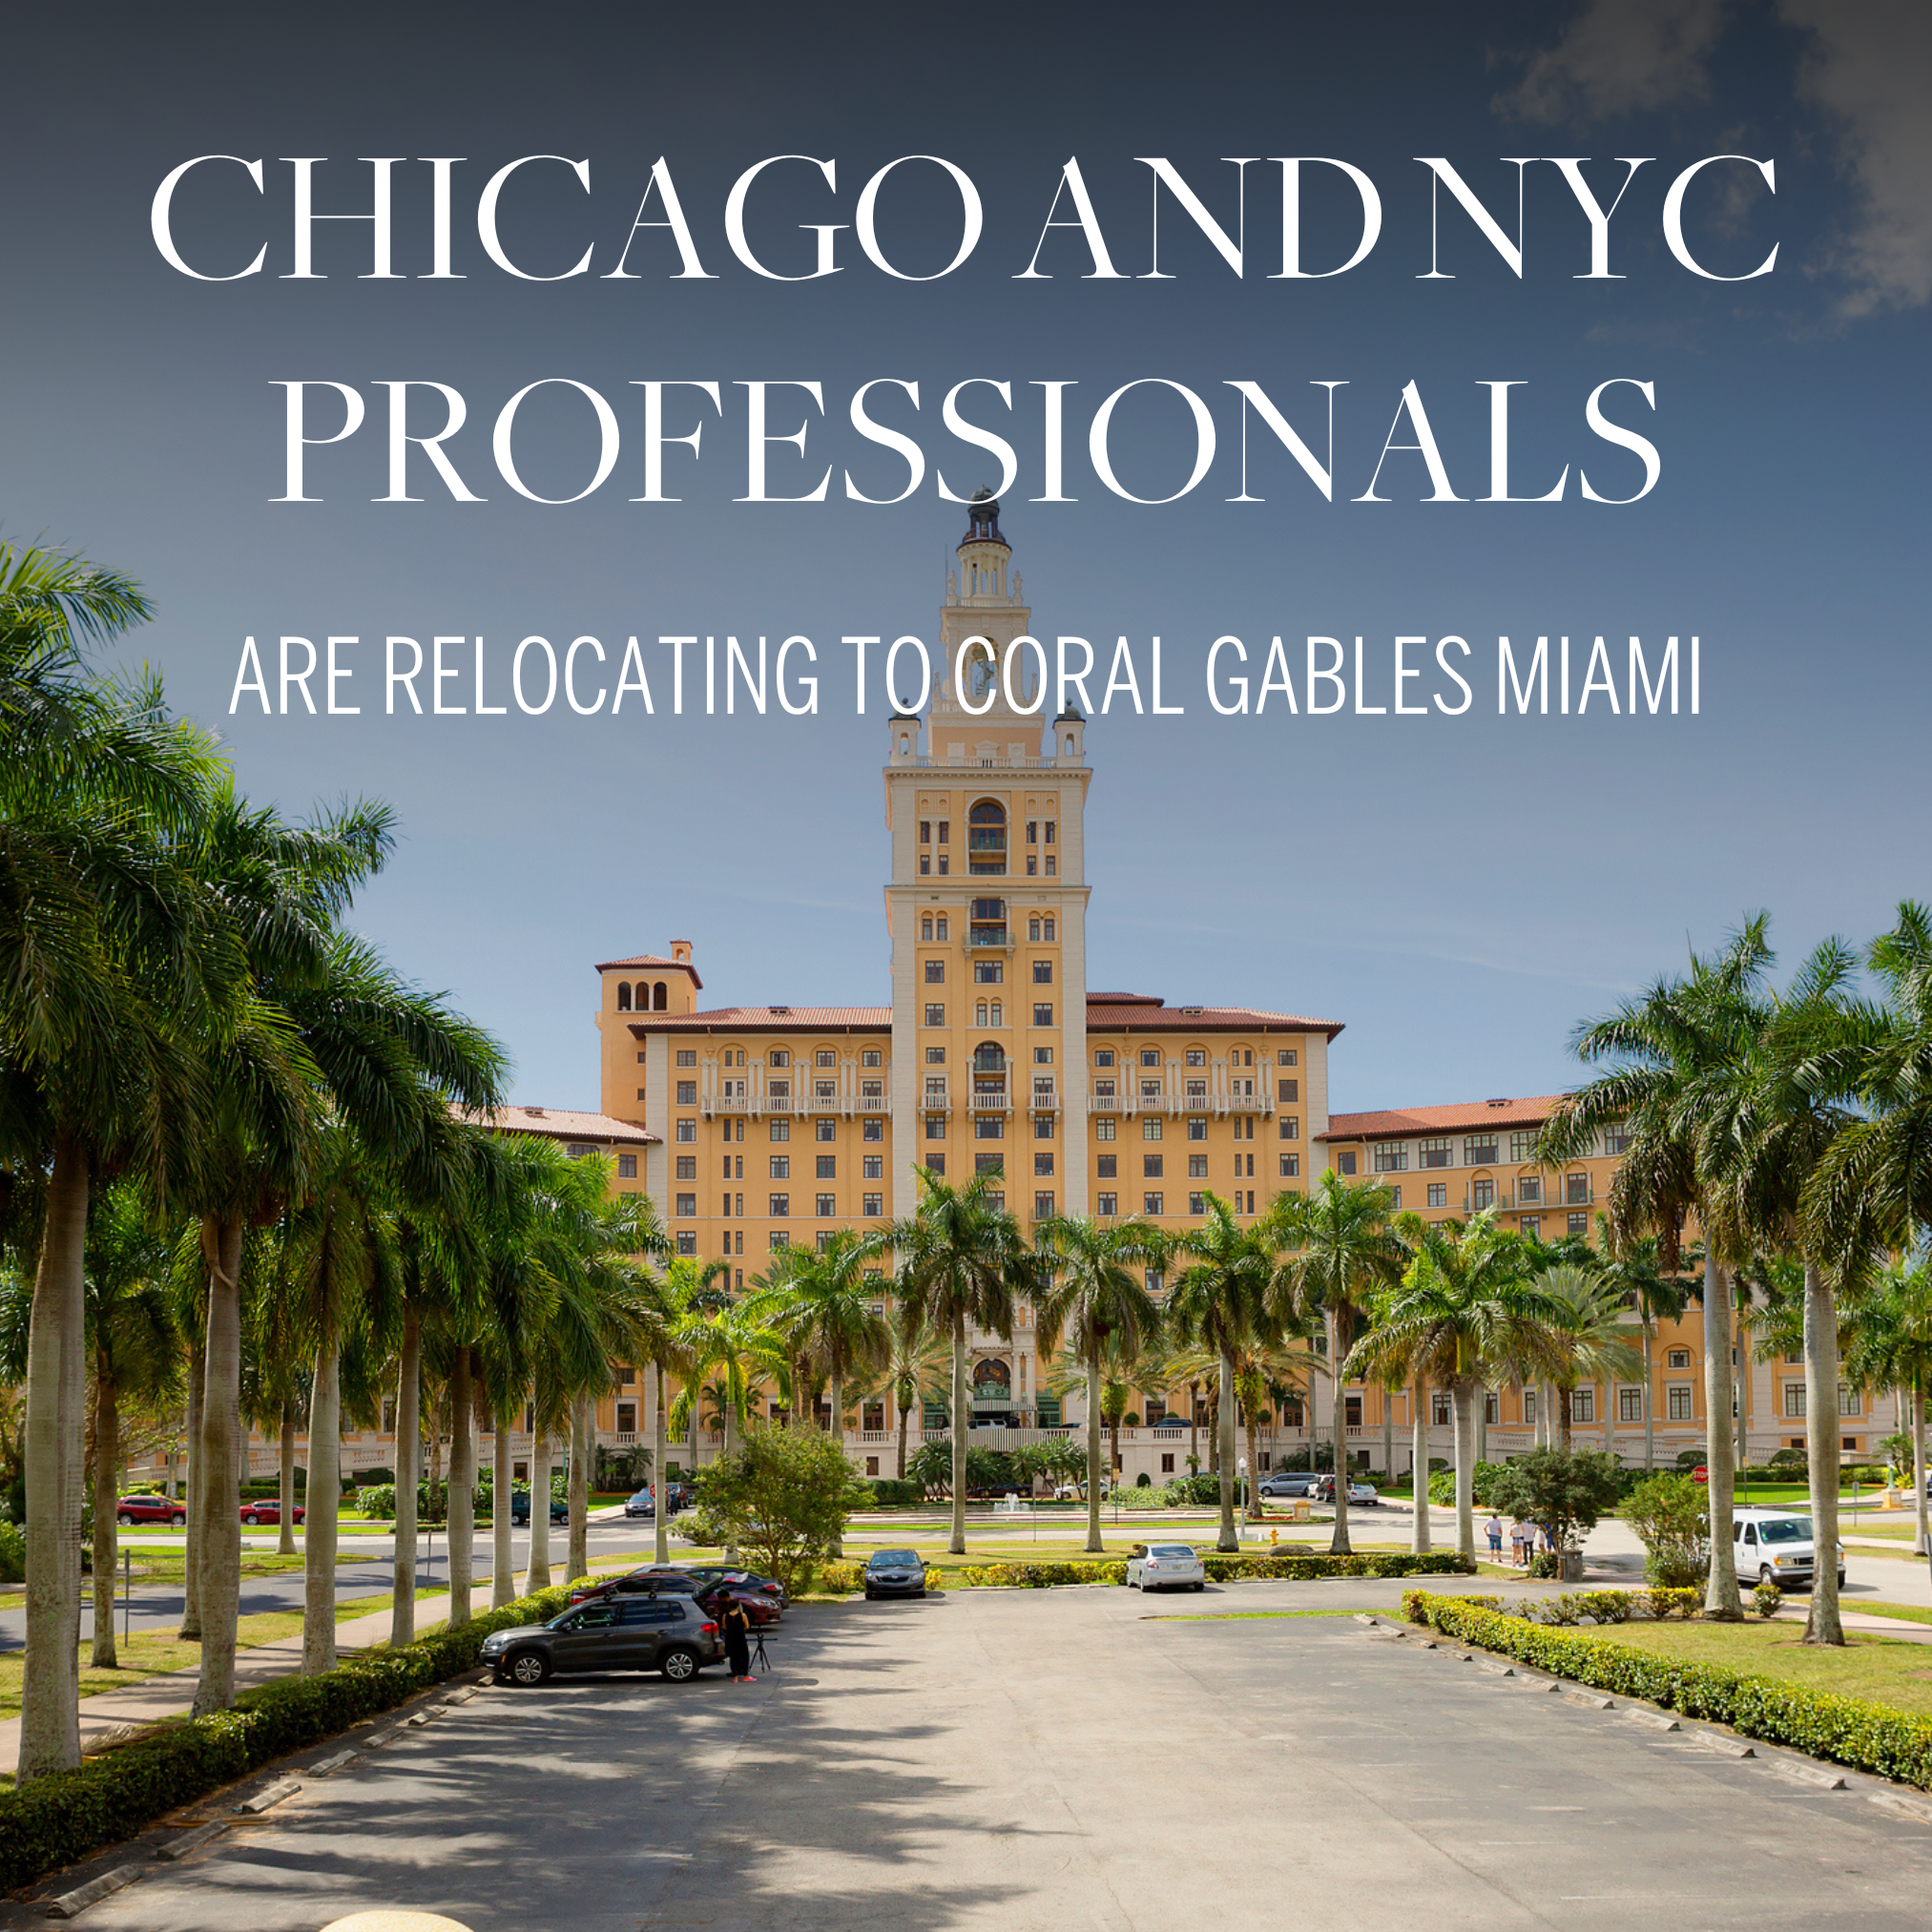 Chicago and nyc residents are relocating to coral gables miam.png